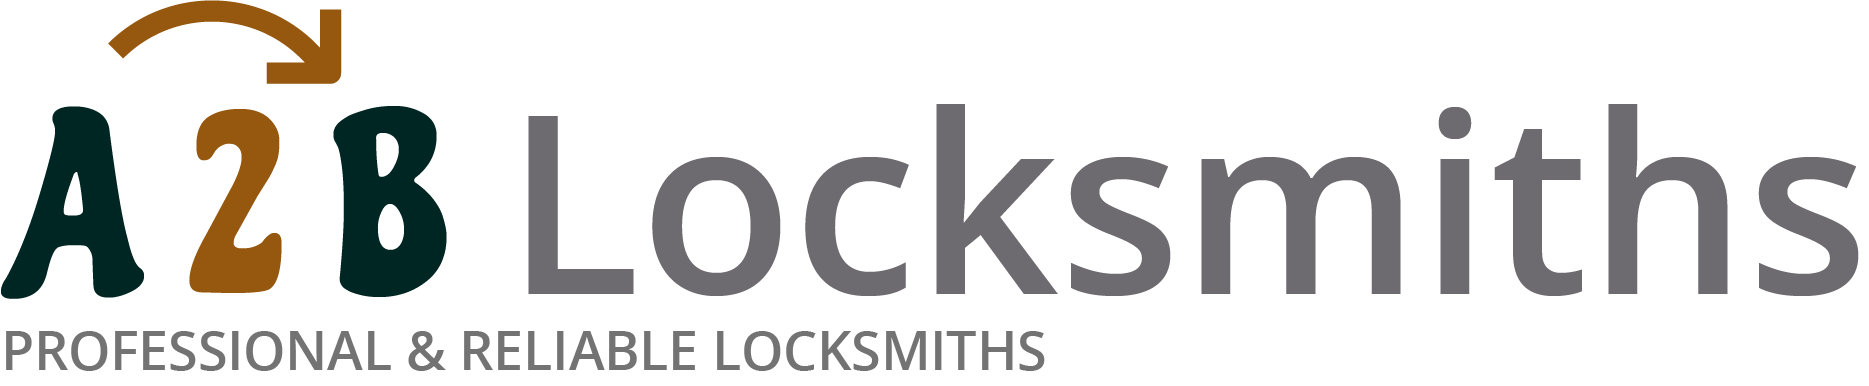 If you are locked out of house in Luton, our 24/7 local emergency locksmith services can help you.